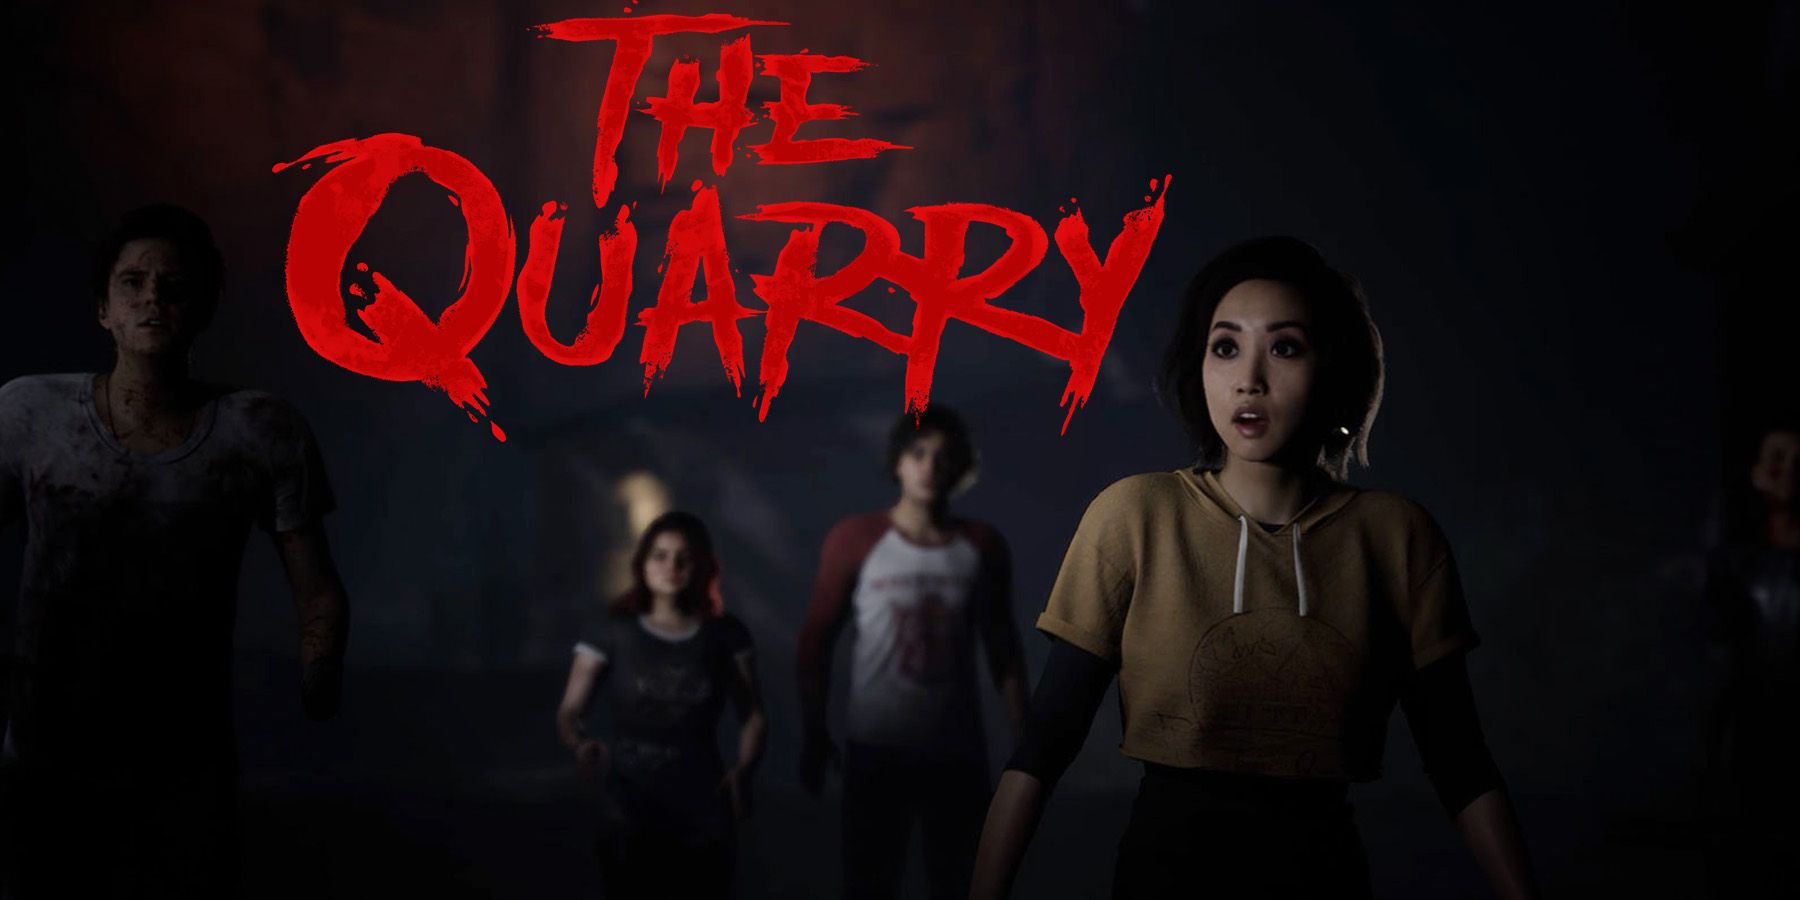 The Quarry crew surprised screenshot with red game logo